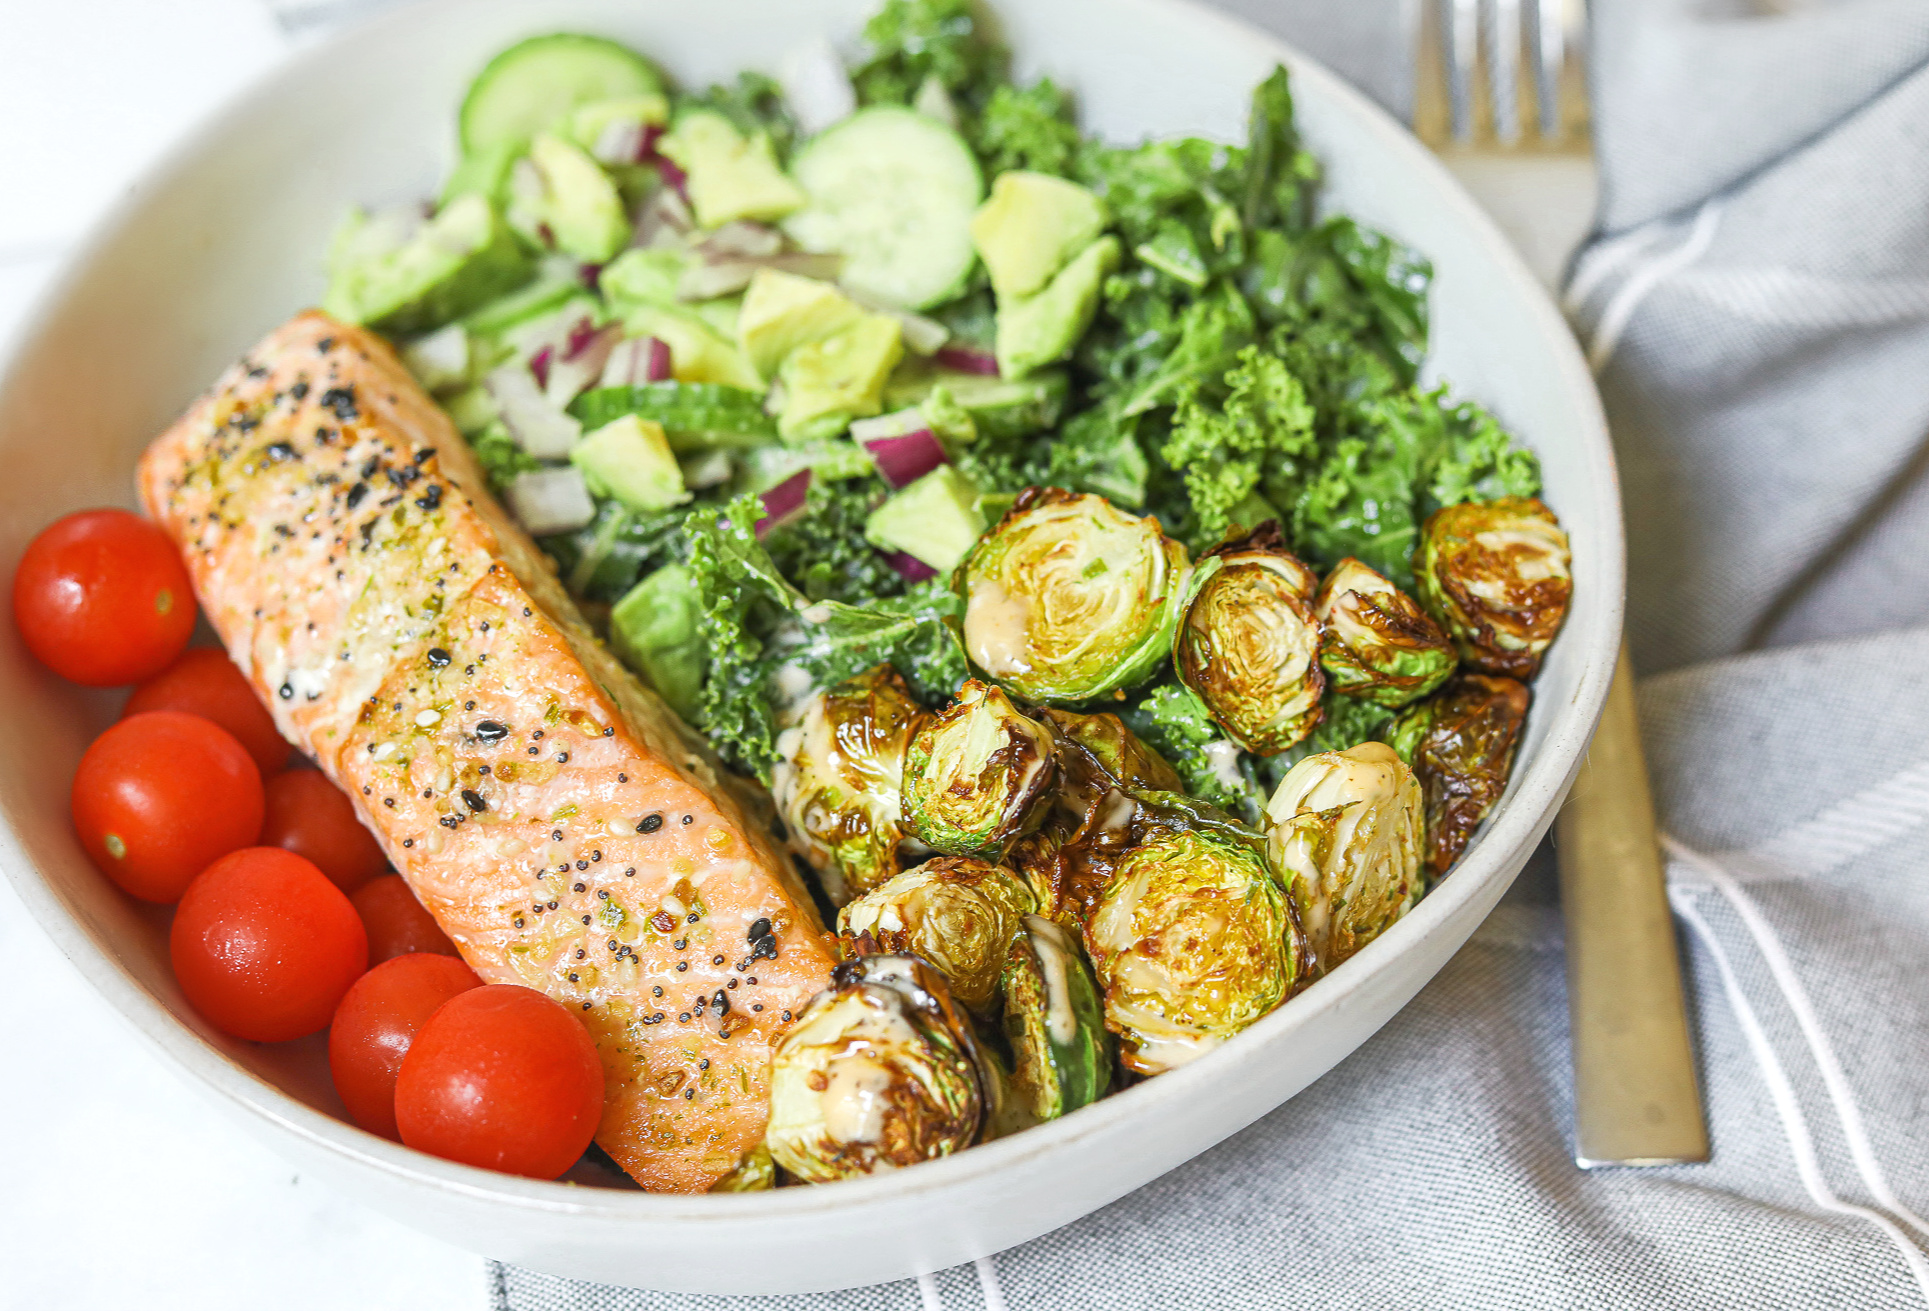 air fryer salmon, trader joes, Brussels sprouts, whole30, whole30 food, whole30 recipes, whole30 lunch, gluten free, dairy free, Brussels sprouts crispy, air fried, air fryer, eat better, Whole Foods, grain free, low carb